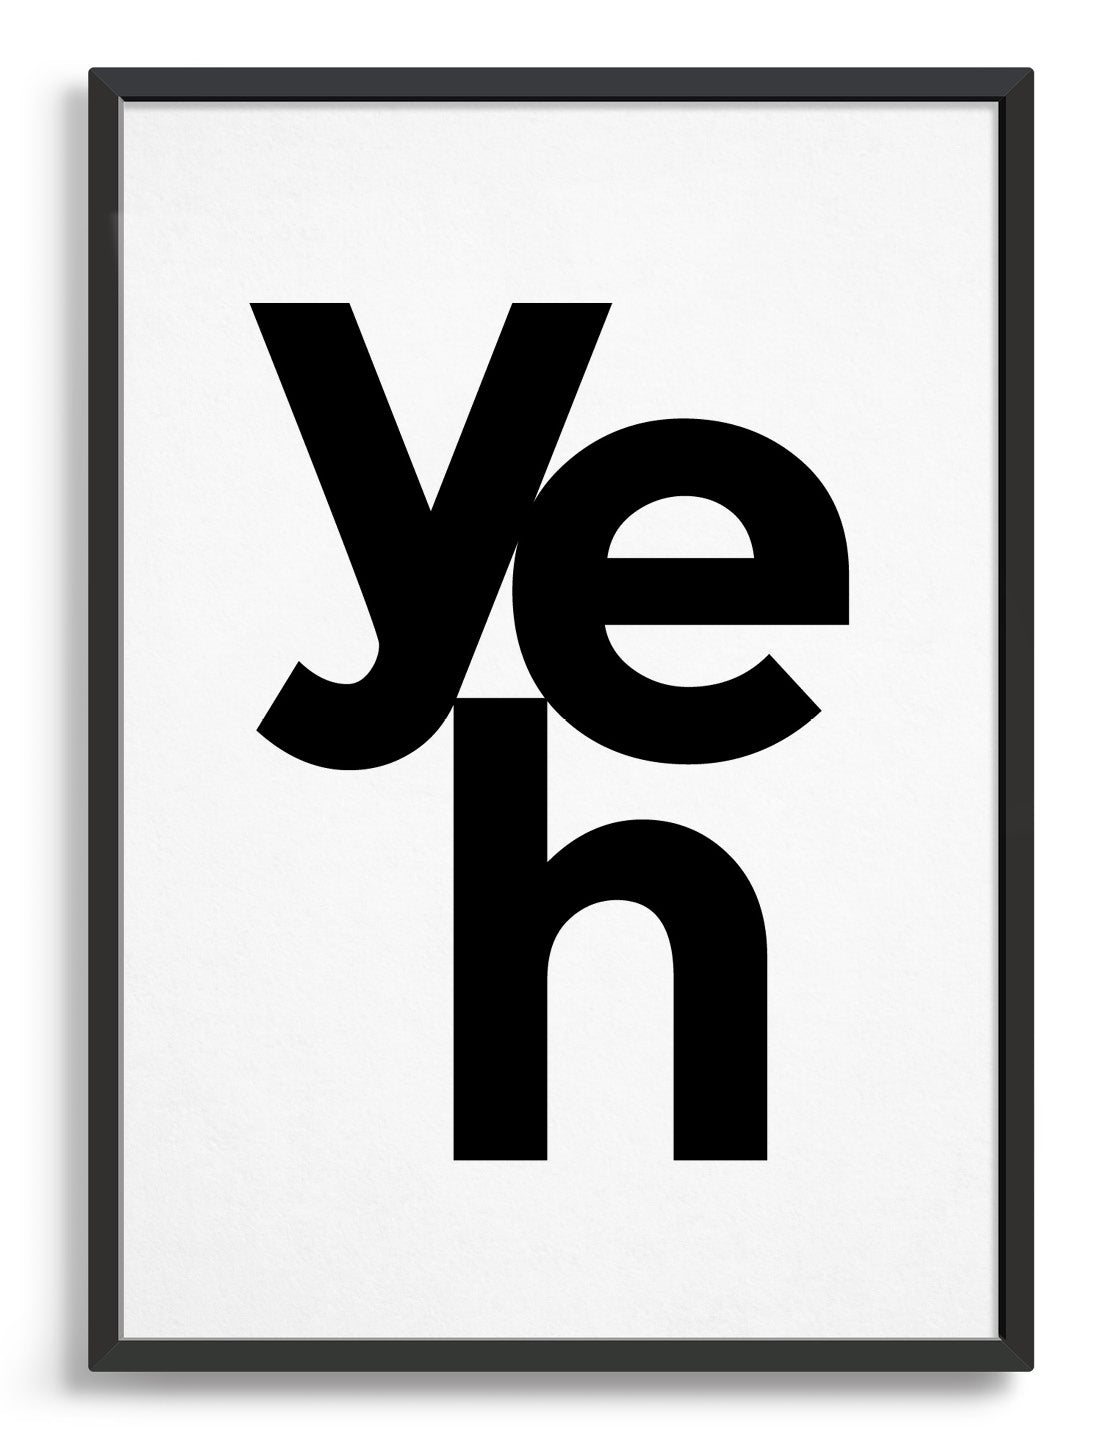 typography art print with yeh in black against a white background